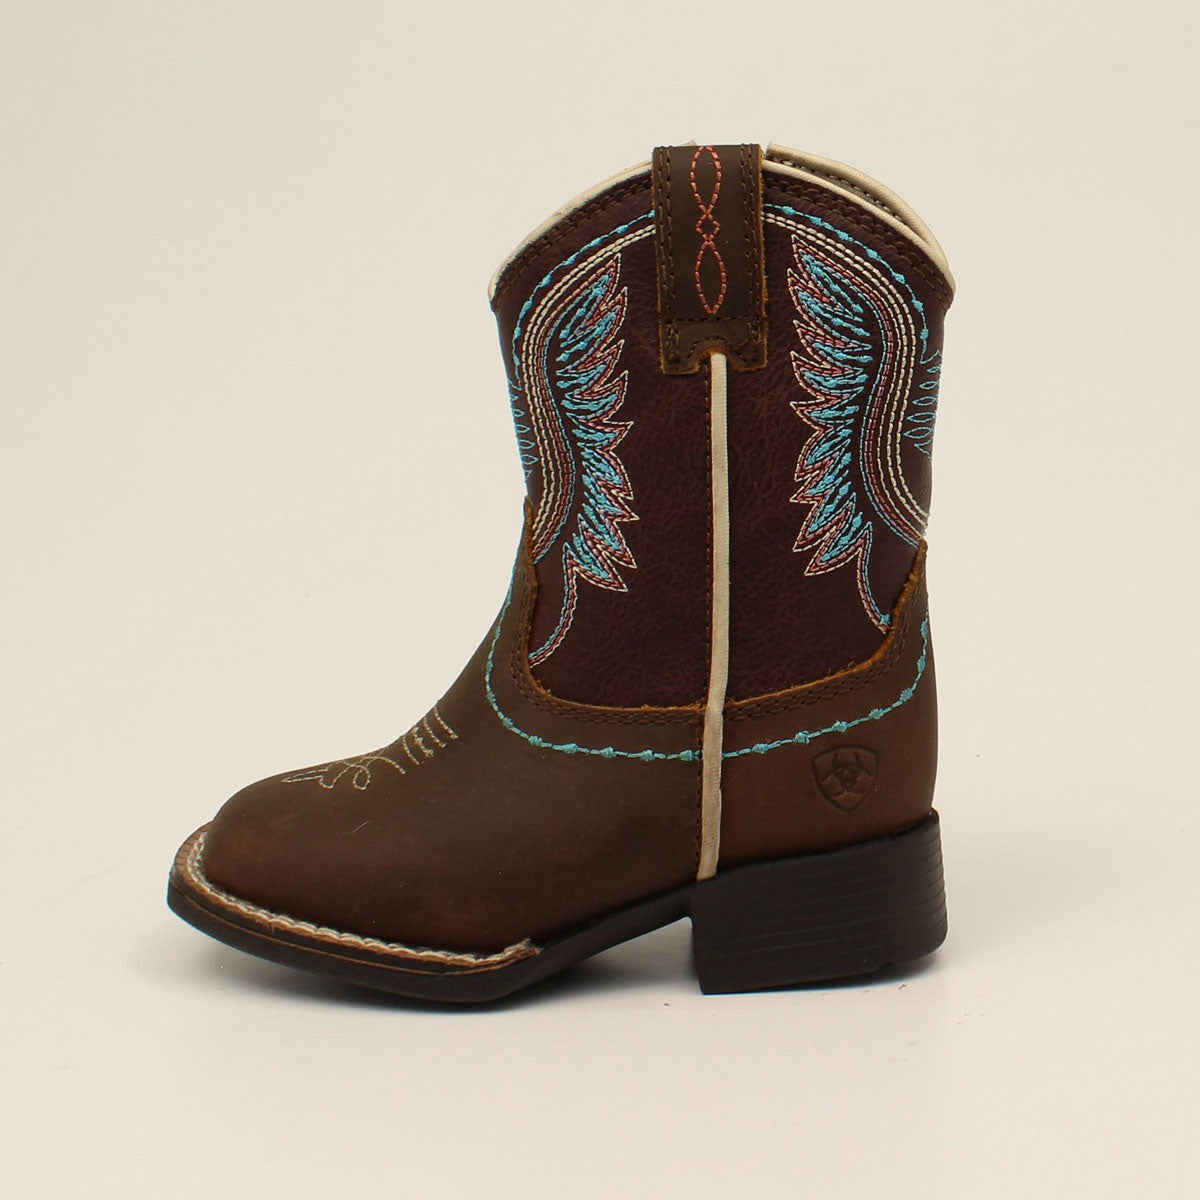 ARIAT LIL’ STOMPERS "BRIAR"TODDLER BOOTS BROWN